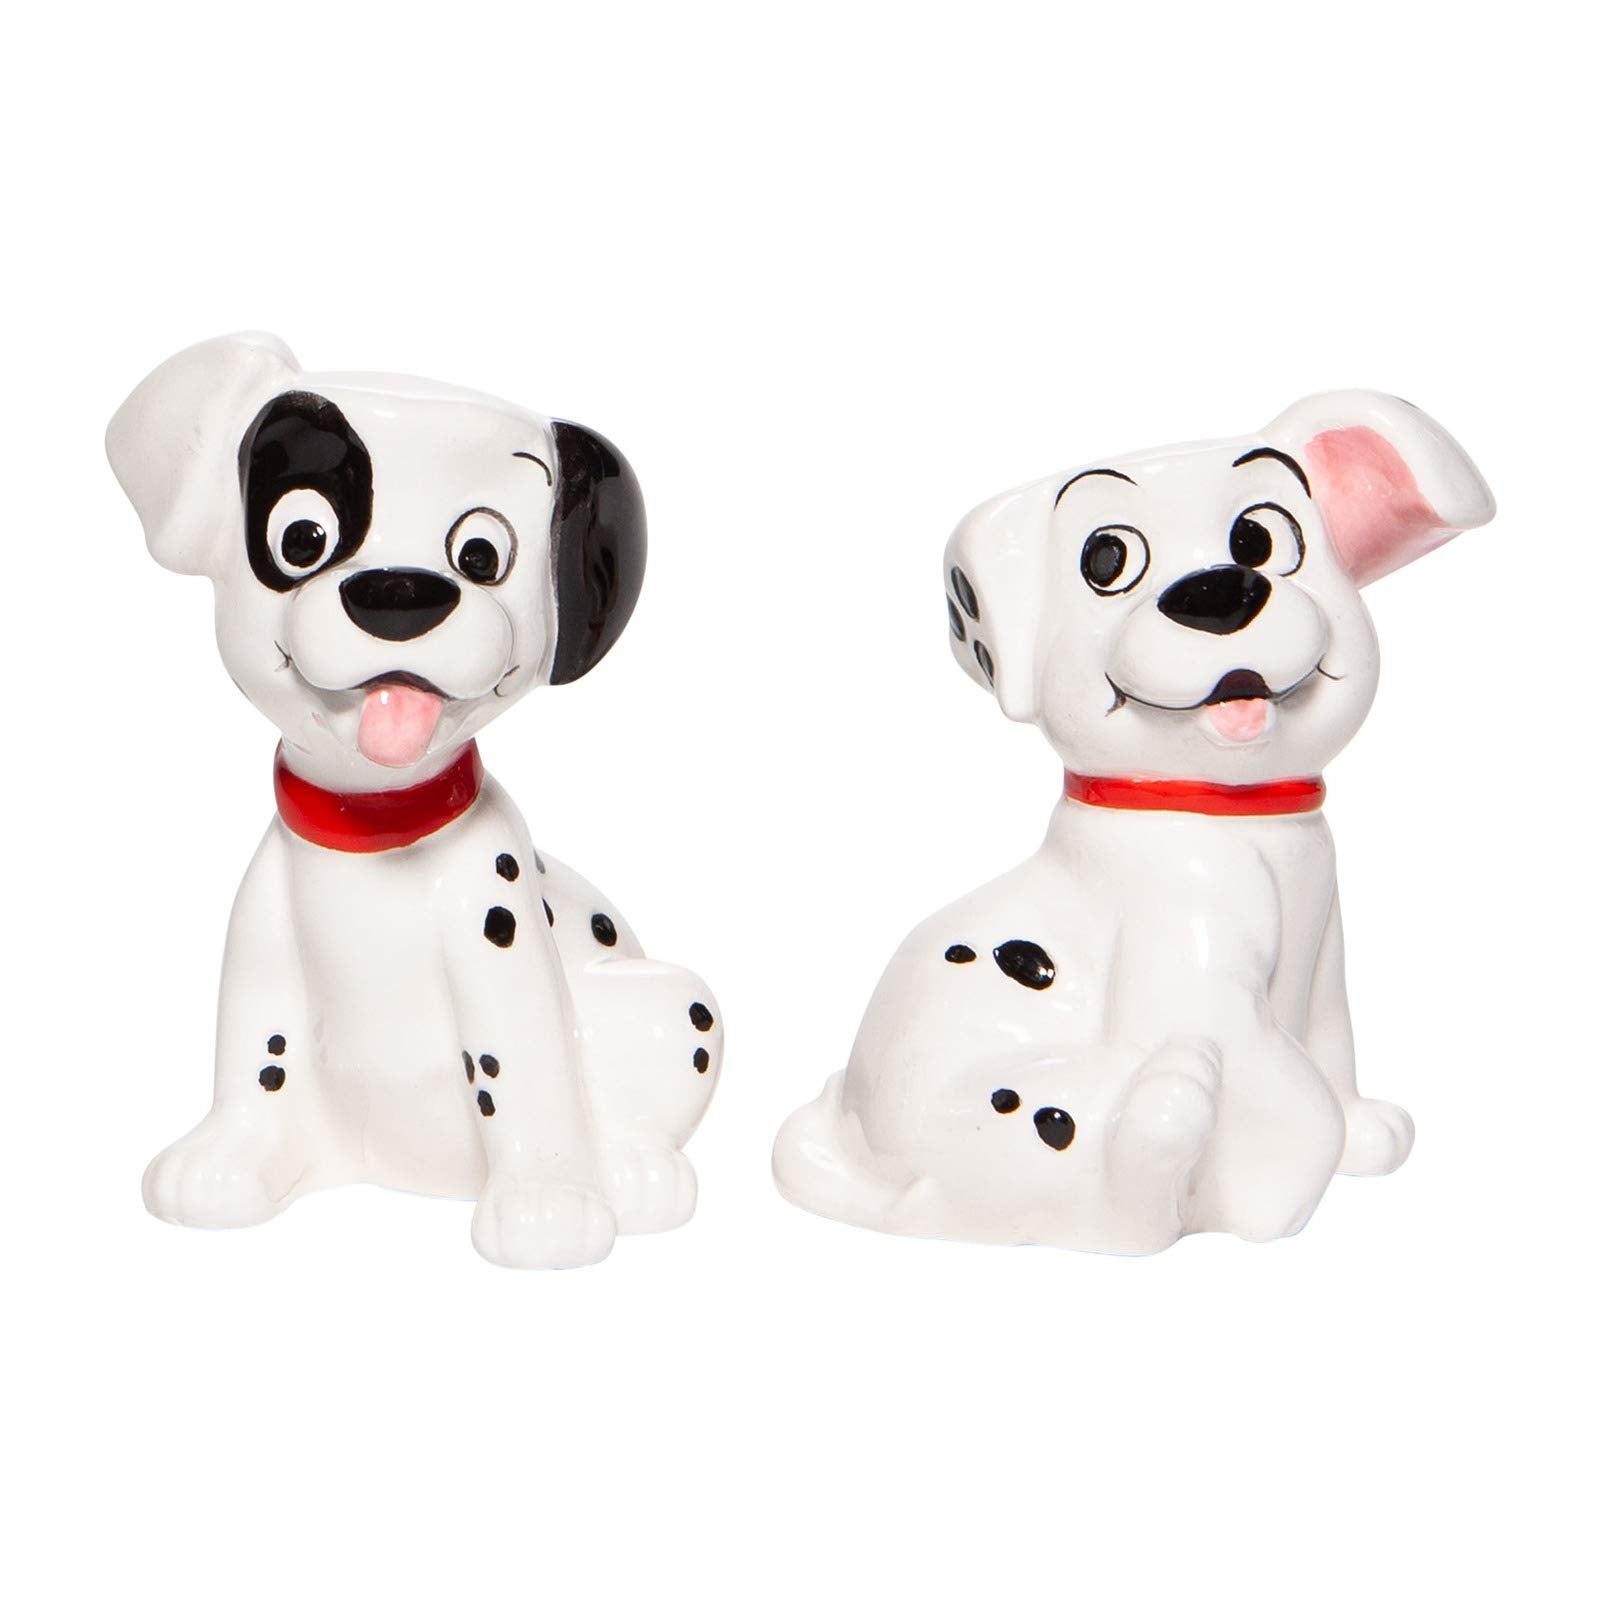 101 Dalmatians Lucky and Patch Salt and Pepper Shaker Set